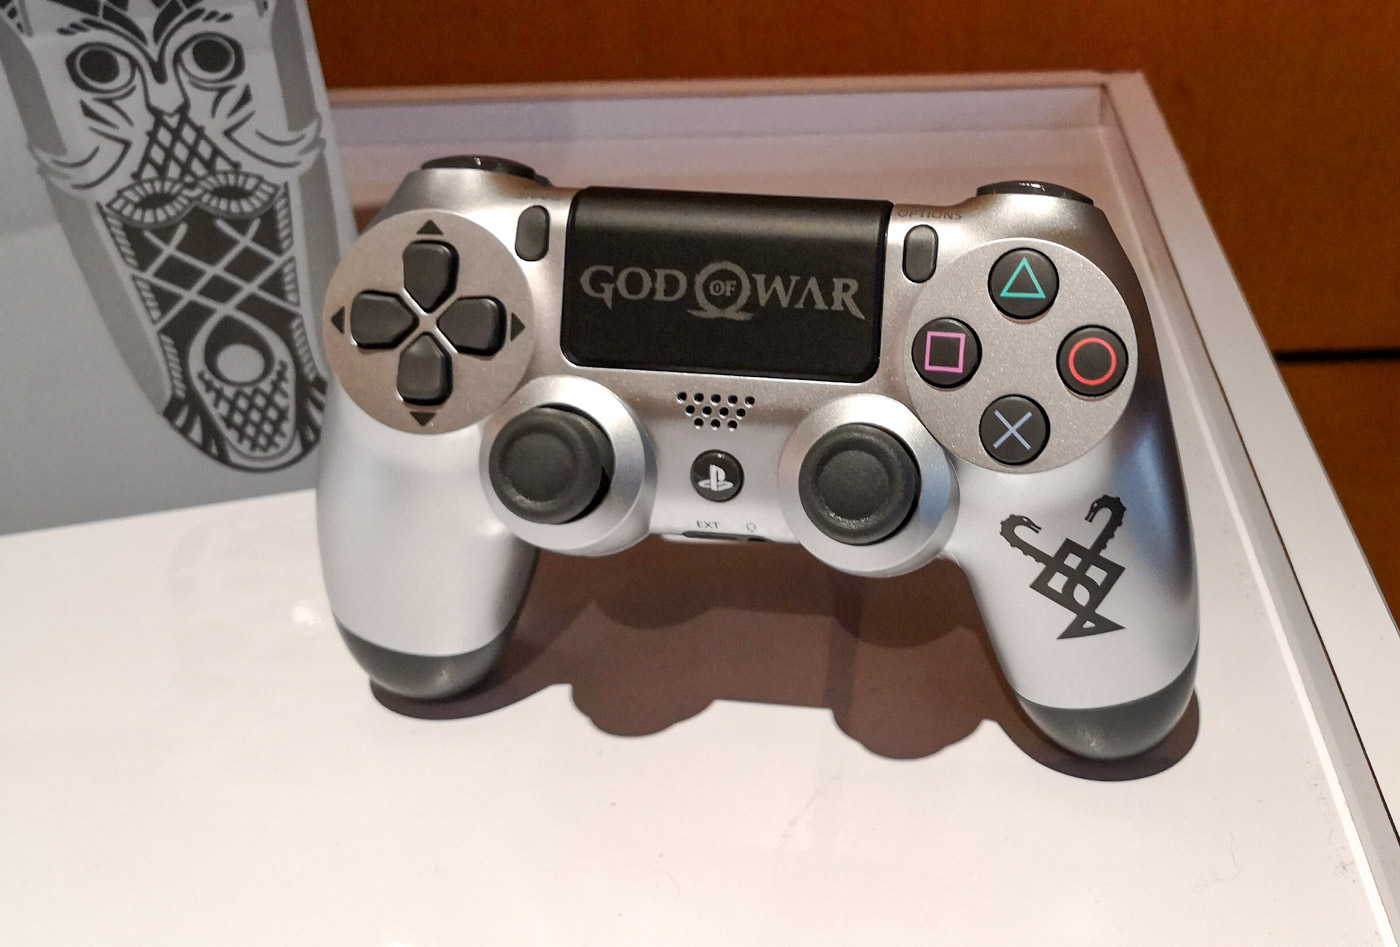 god of war ps4 limited edition console